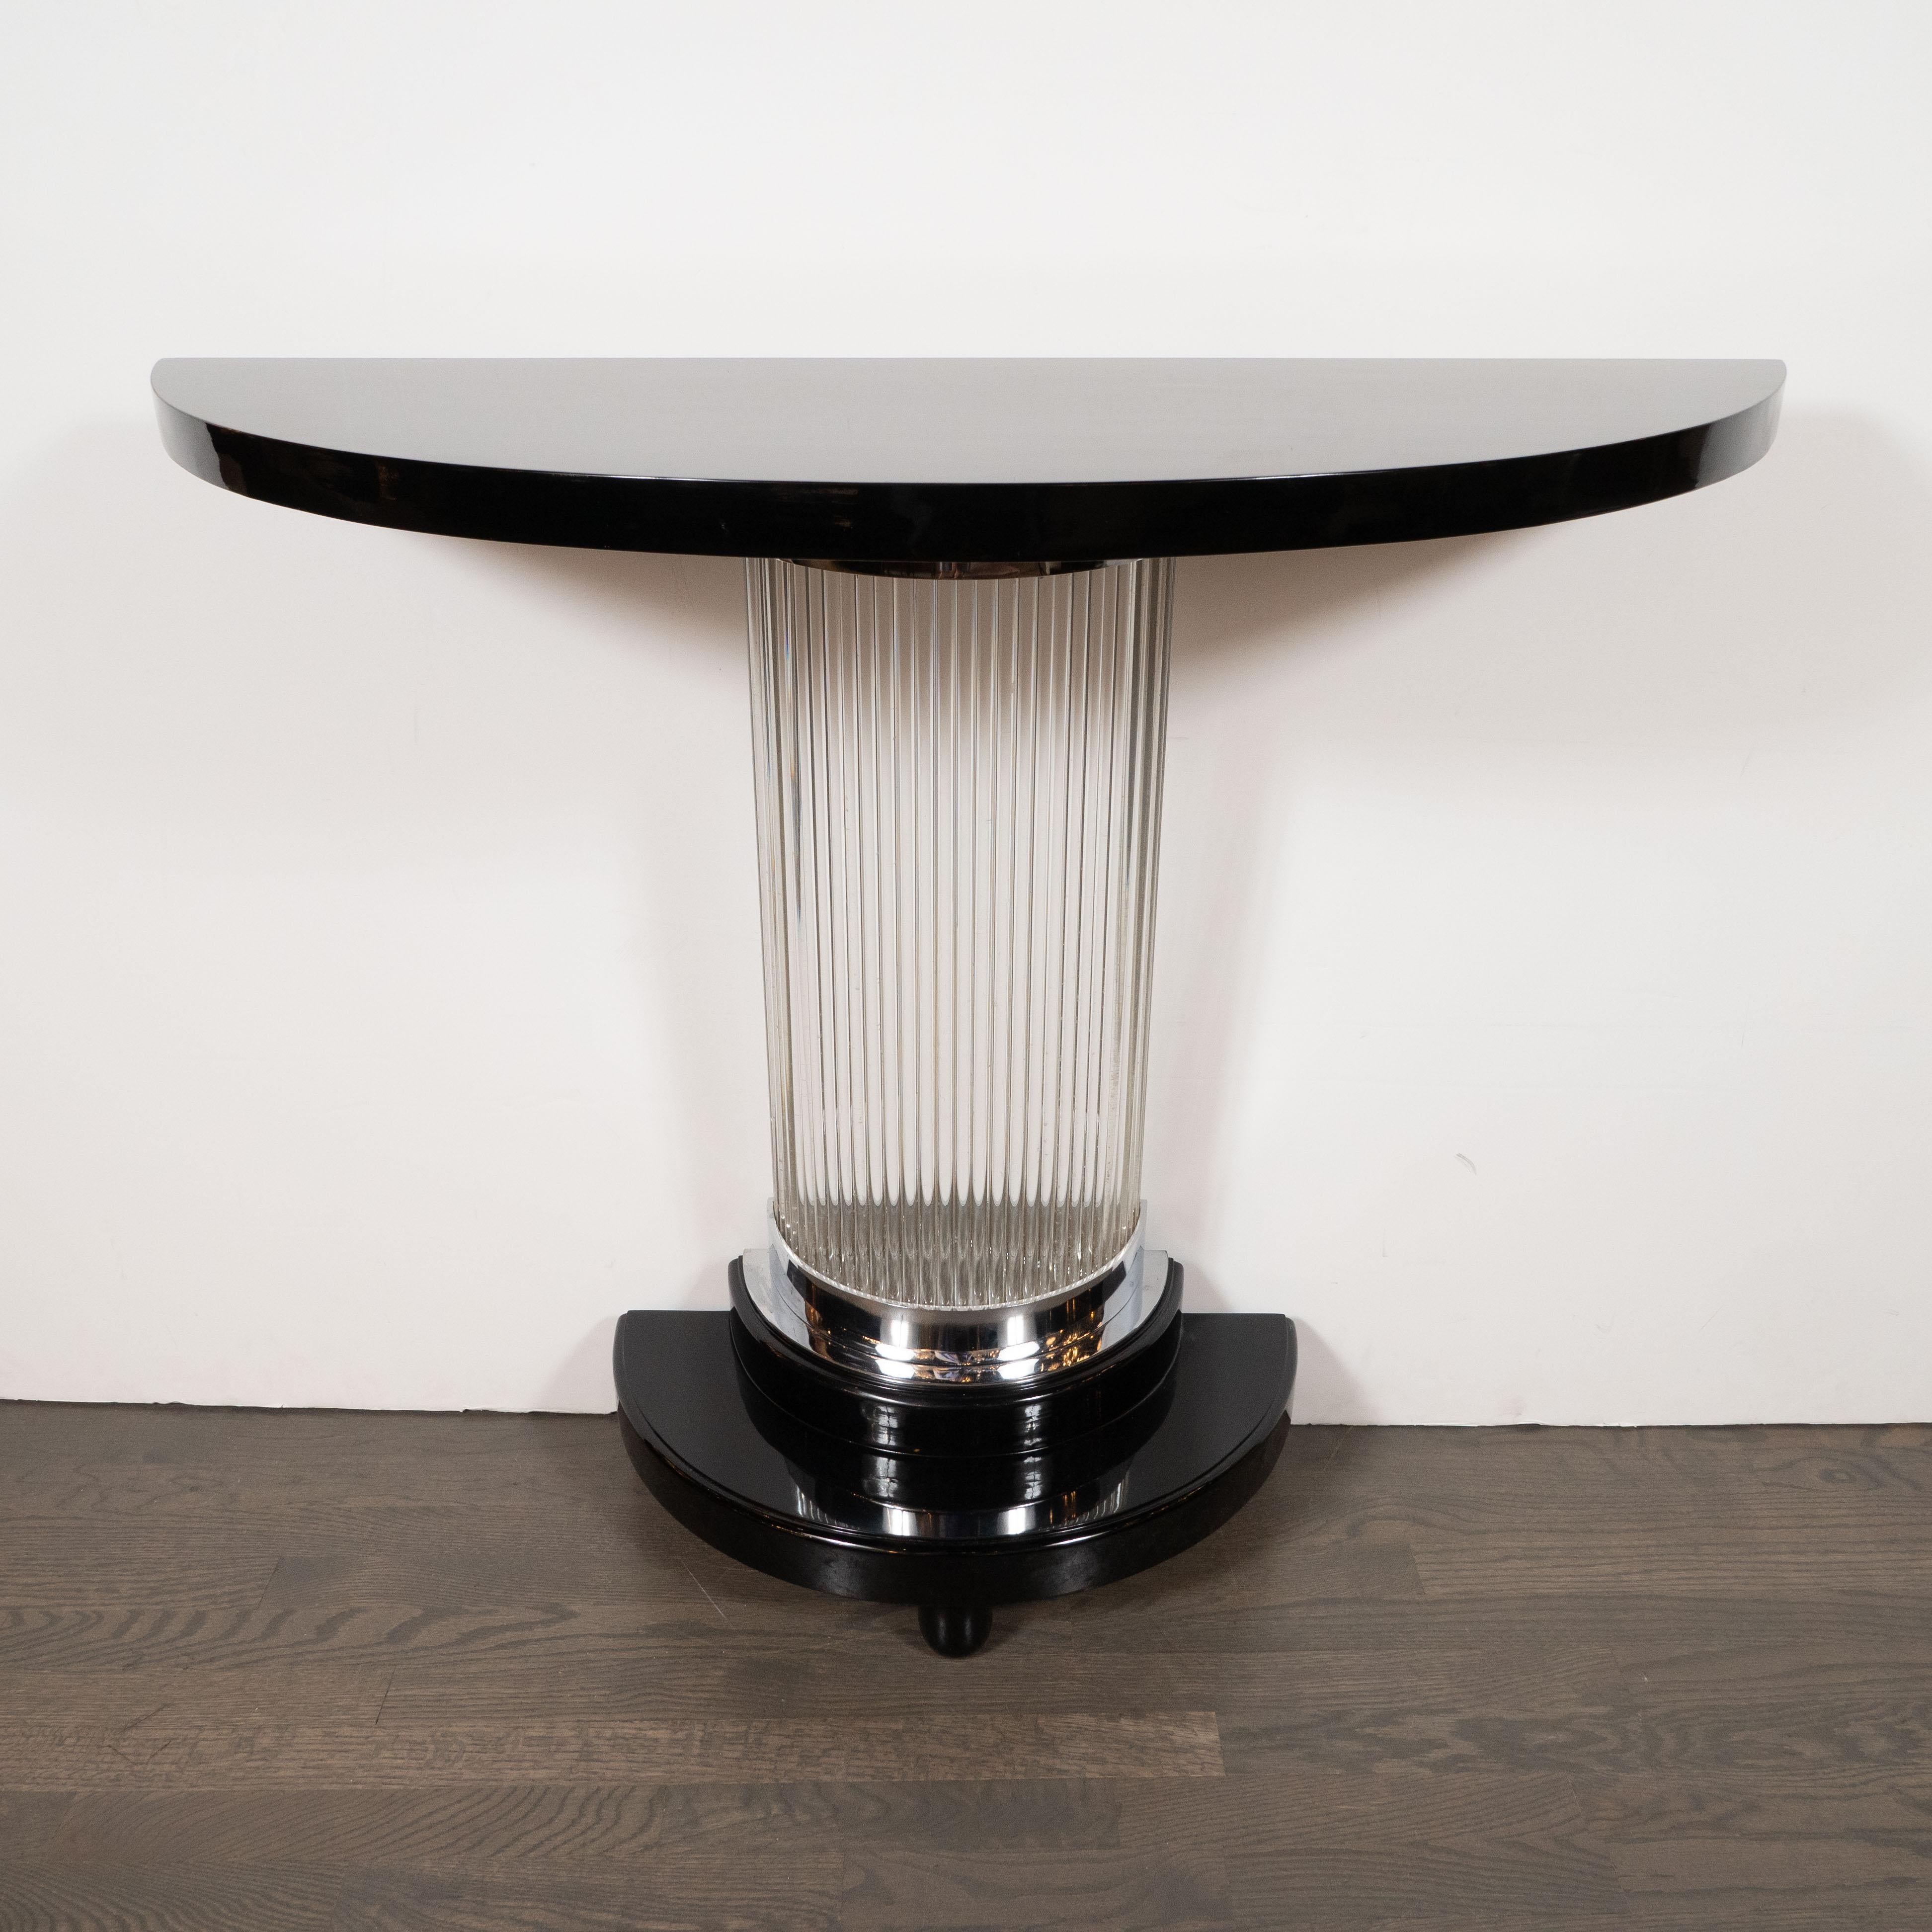 American Art Deco Streamlined Black Lacquer Demilune Console Table with Glass Rods